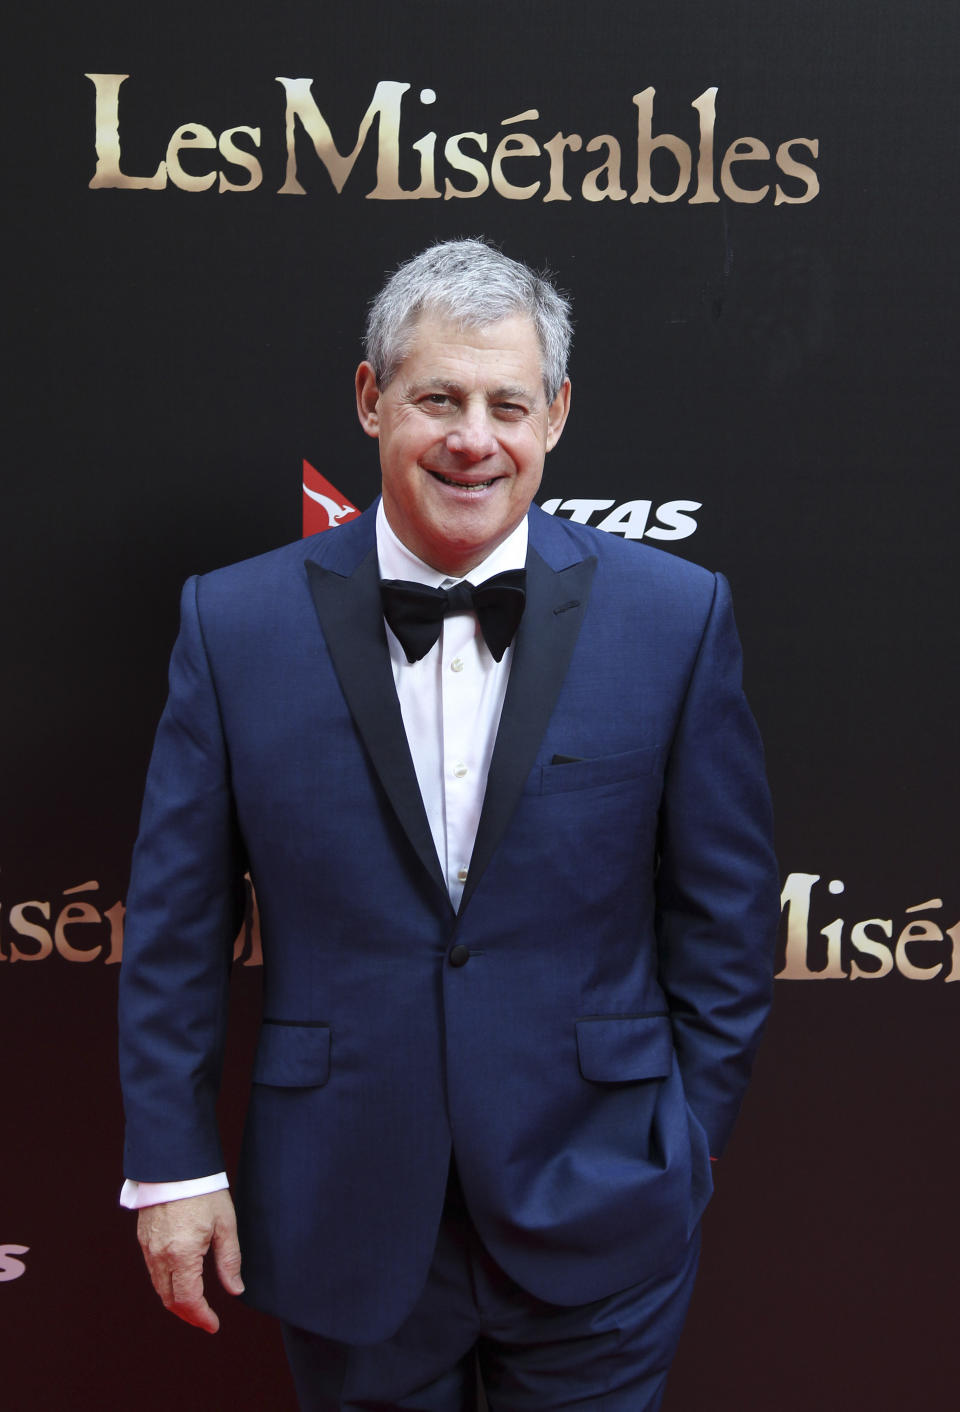 FILE - This Dec. 21, 2012 file photo shows Cameron Mackintosh, producer of the stage production of "Les Miserables" in Sydney, Australia for the premiere of the film version. Mackintosh is in New York working on a new version of "Les Miserables" that opens on Broadway this month. Mackintosh, the producer behind such mega-hits as "Cats," "The Phantom of the Opera" and "Miss Saigon, " keeps finding himself in the strange position of returning to former triumphs, stripping them down and then building them up again. "Les Miserables" opens on March 23. (AP Photo/Rob Griffith, File)